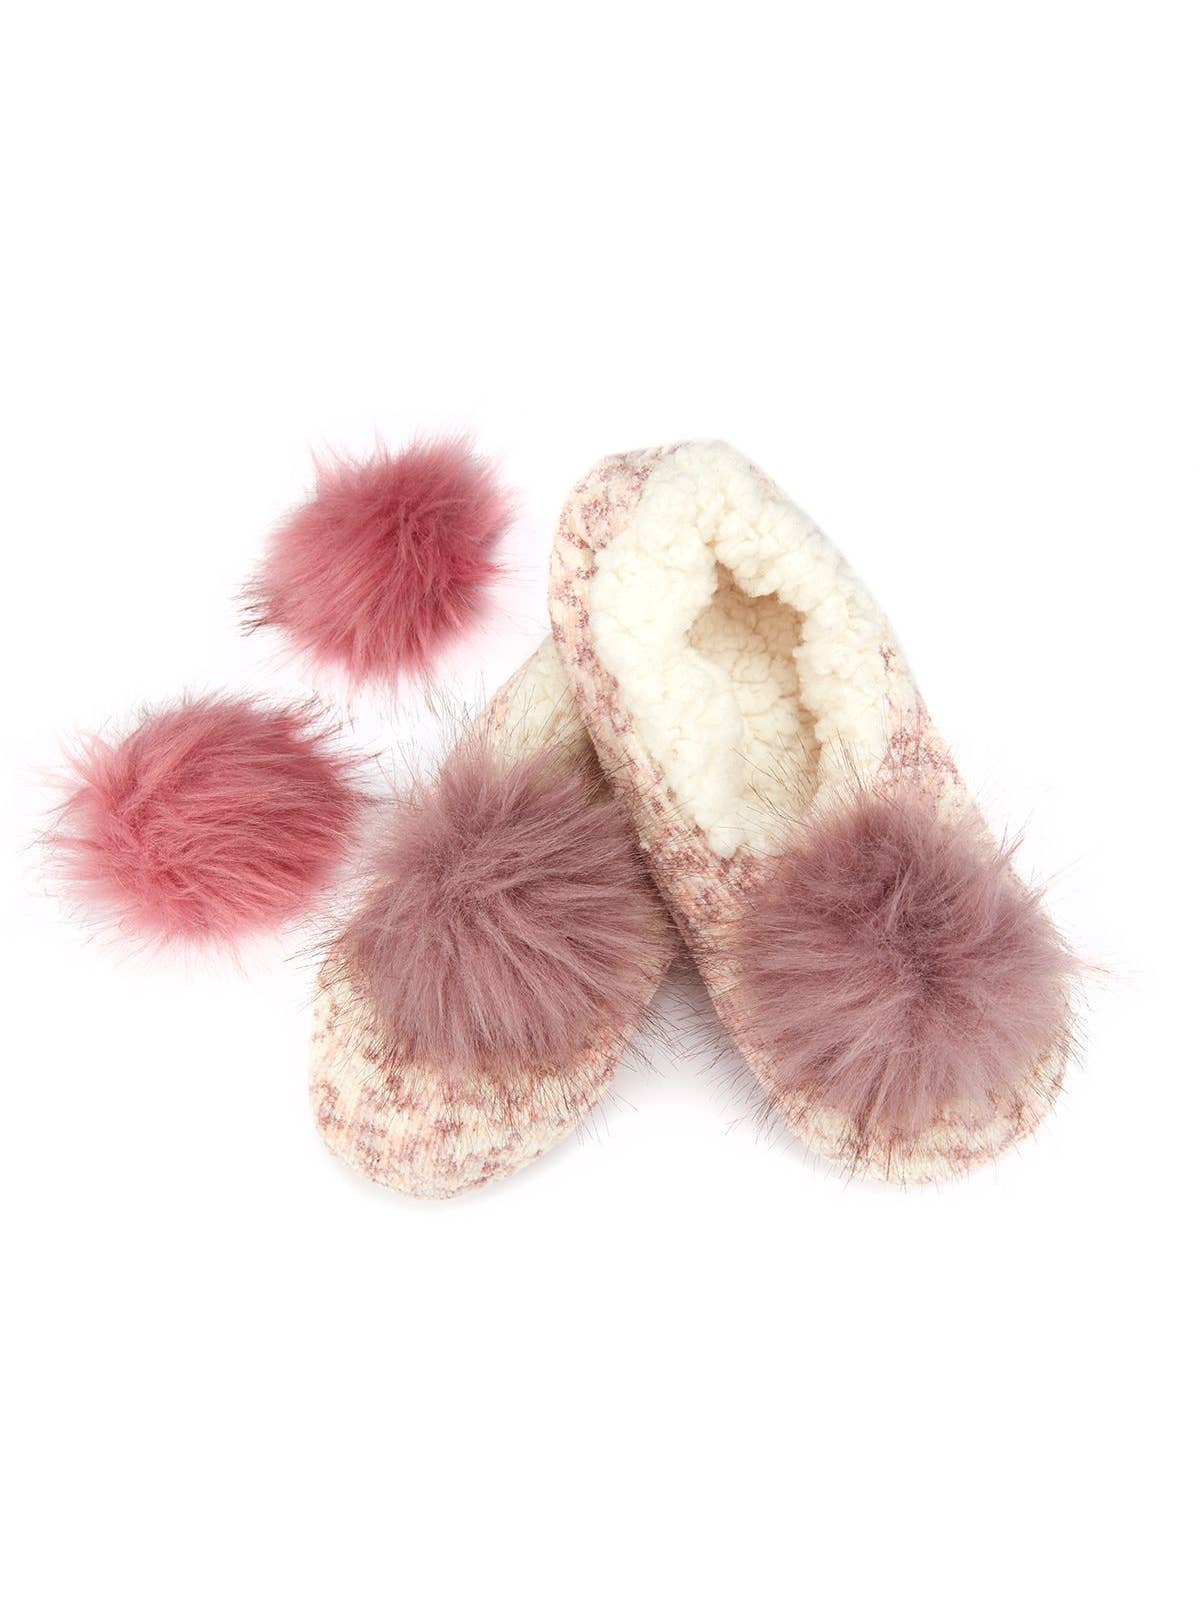 Speckled Chenille Interchangeable Pom Pom Slippers in Pink